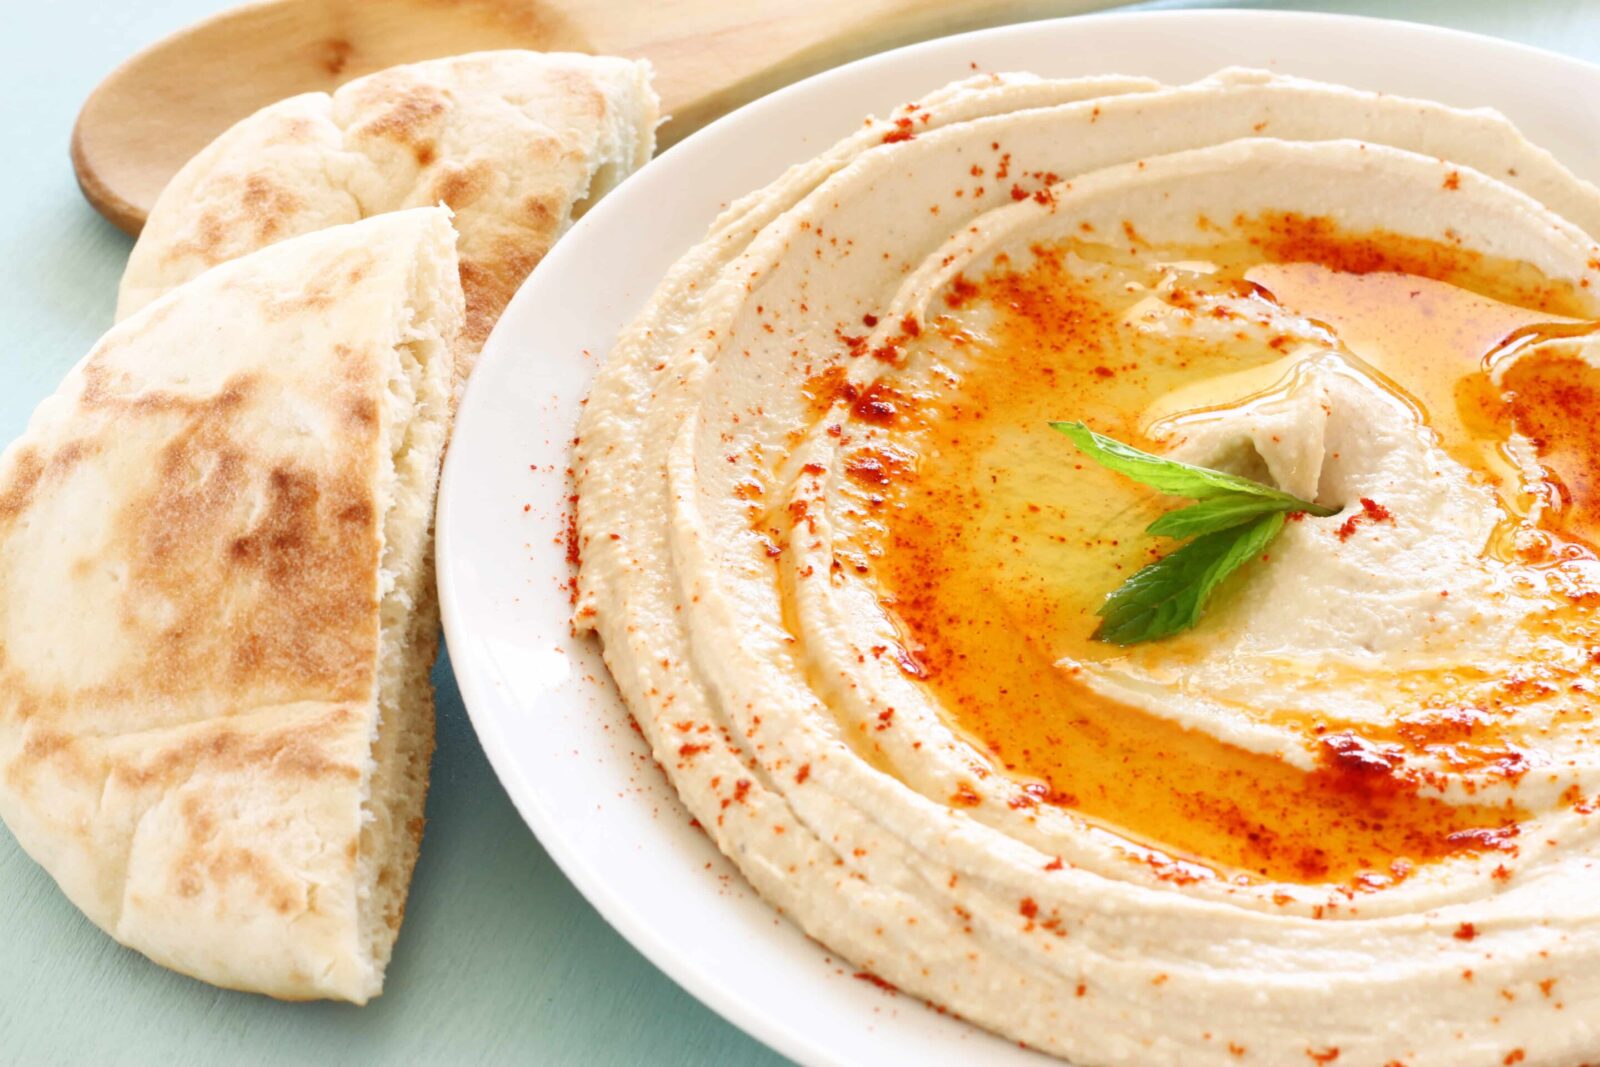 hummus served on a white plate along with bread